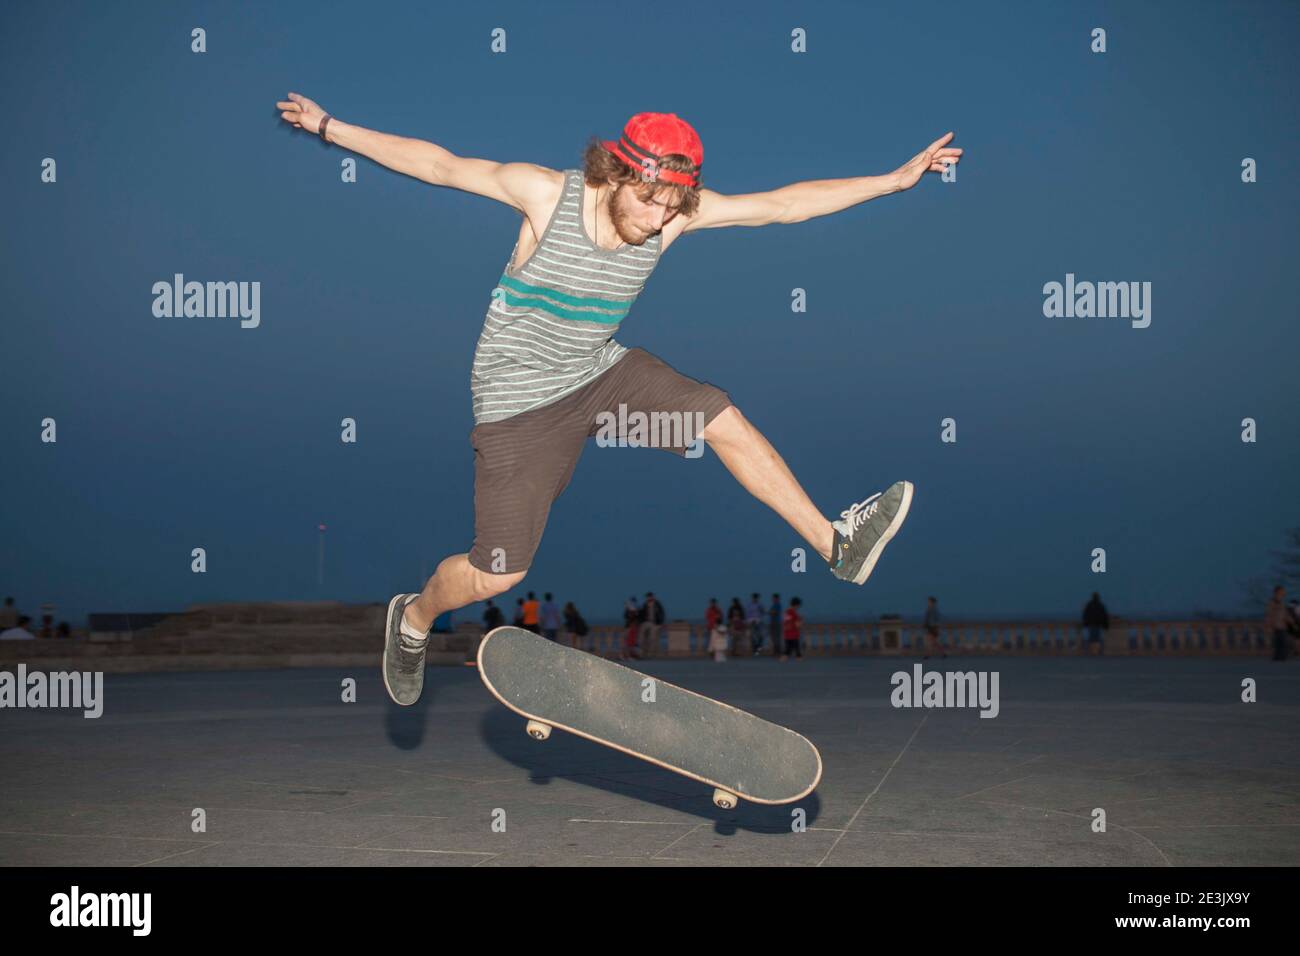 Young skateboard enthusiast flpping his board at night Stock Photo